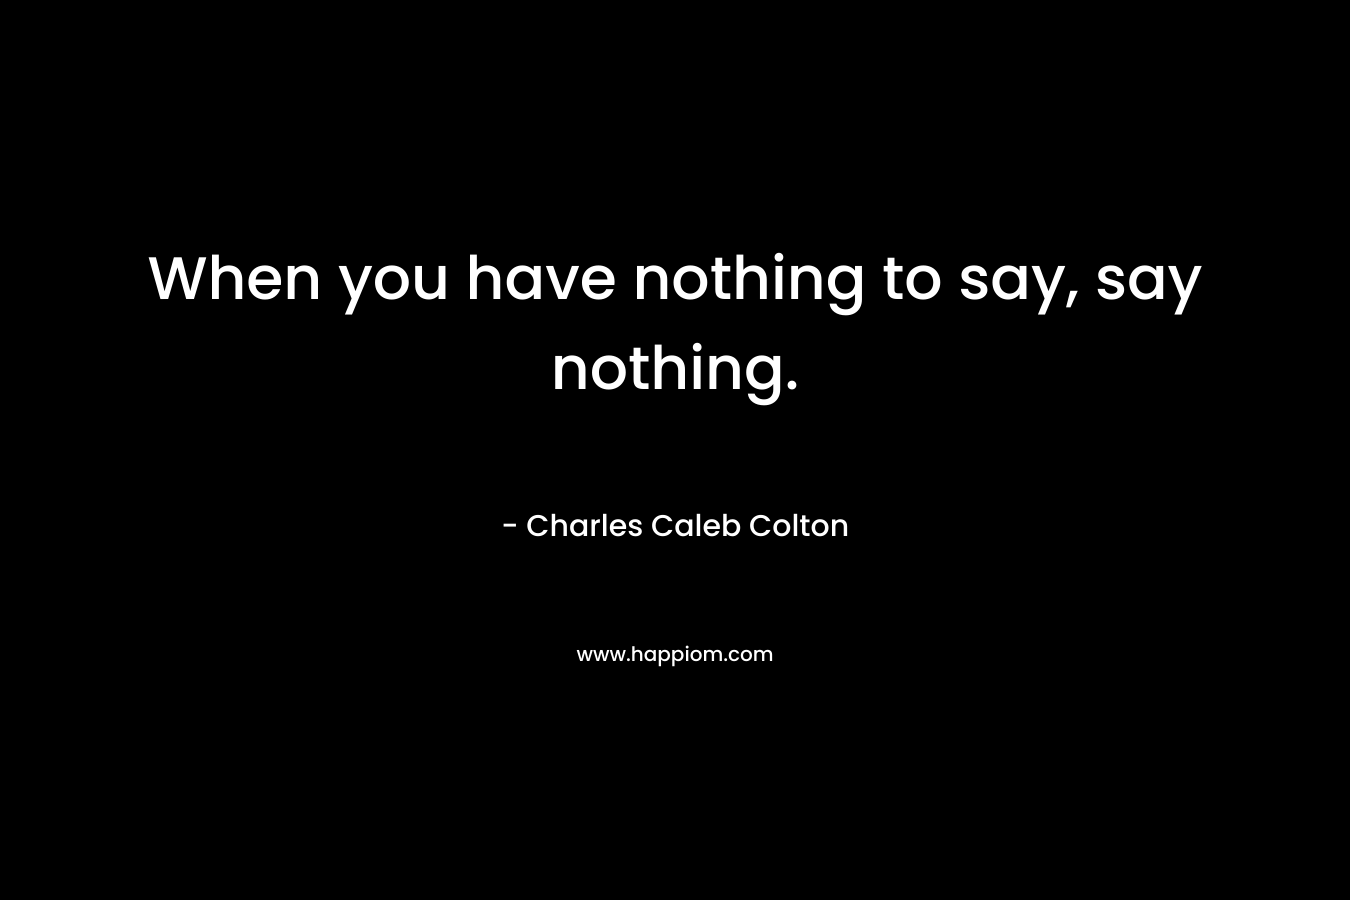 When you have nothing to say, say nothing. – Charles Caleb Colton